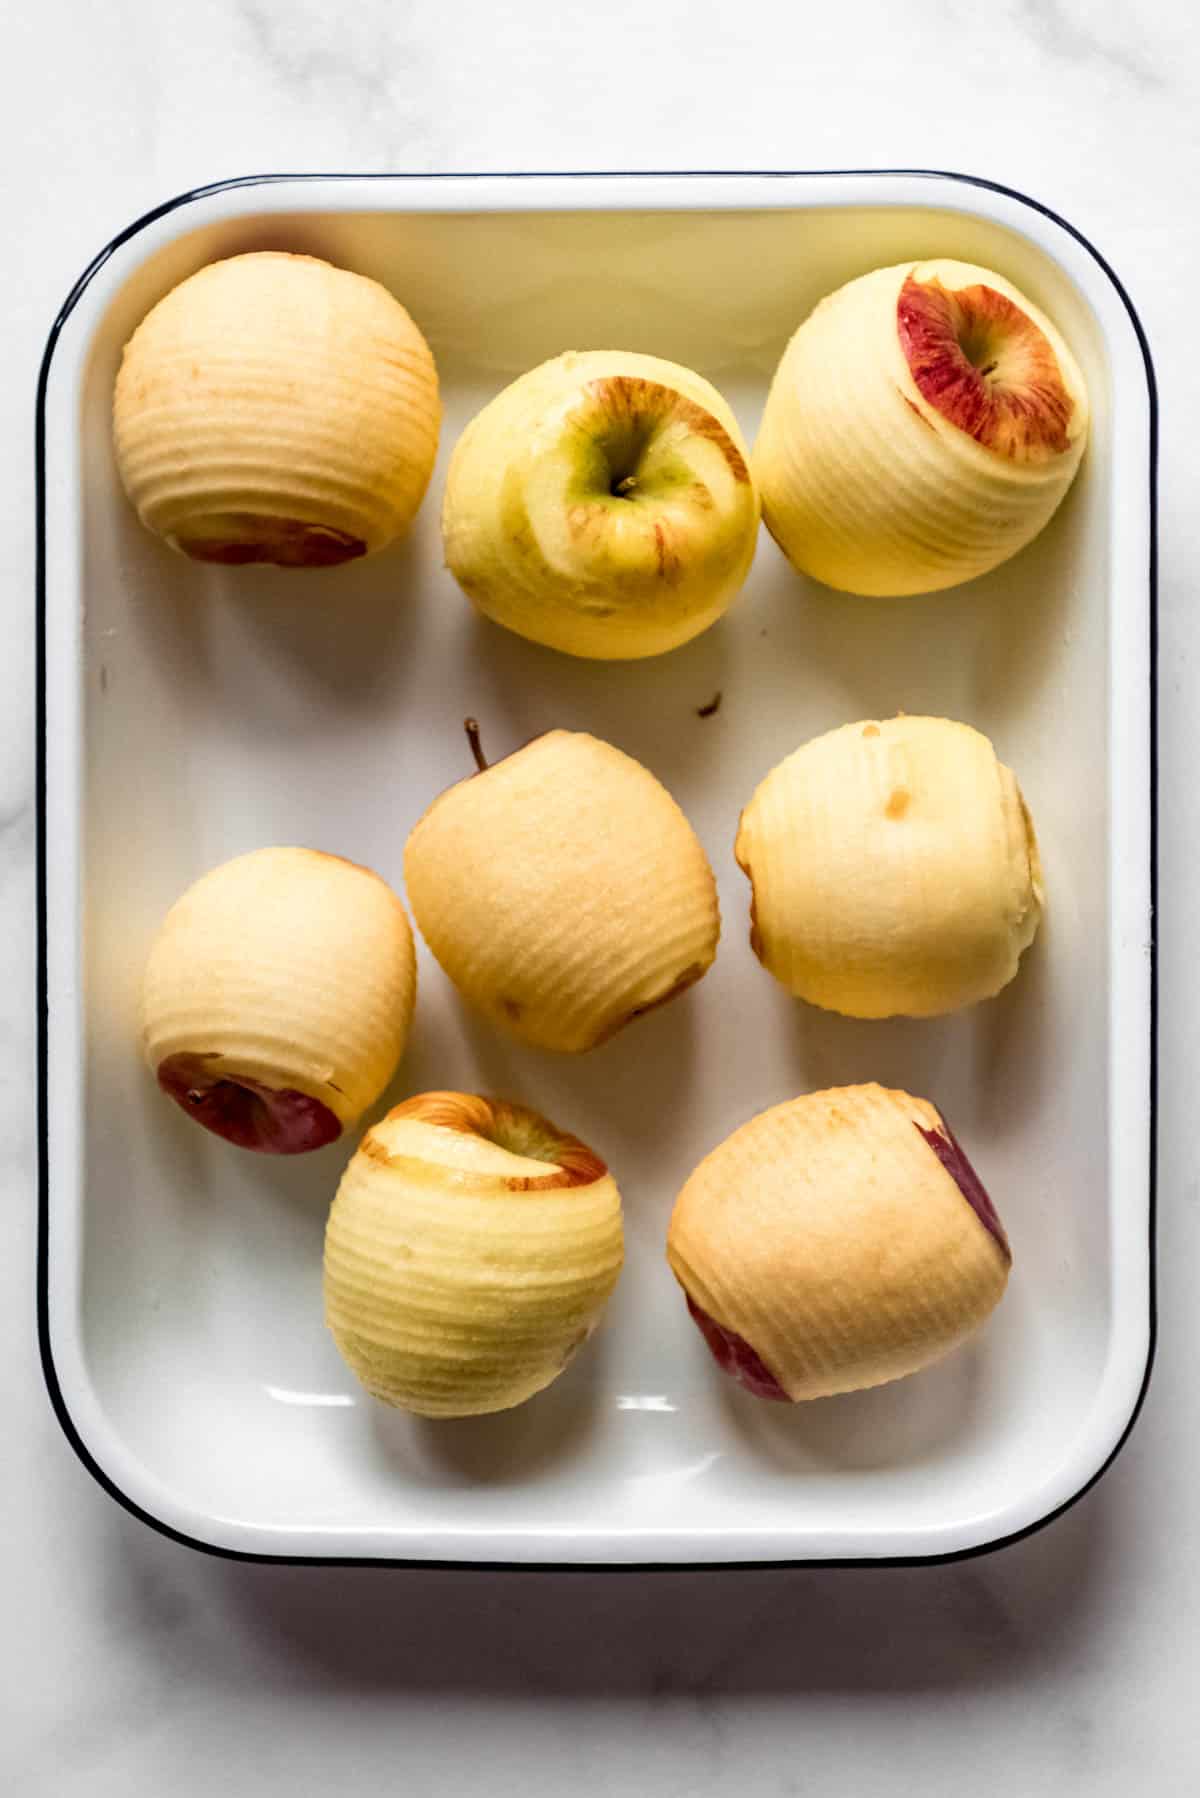 Several peeled apples in a baking dish.